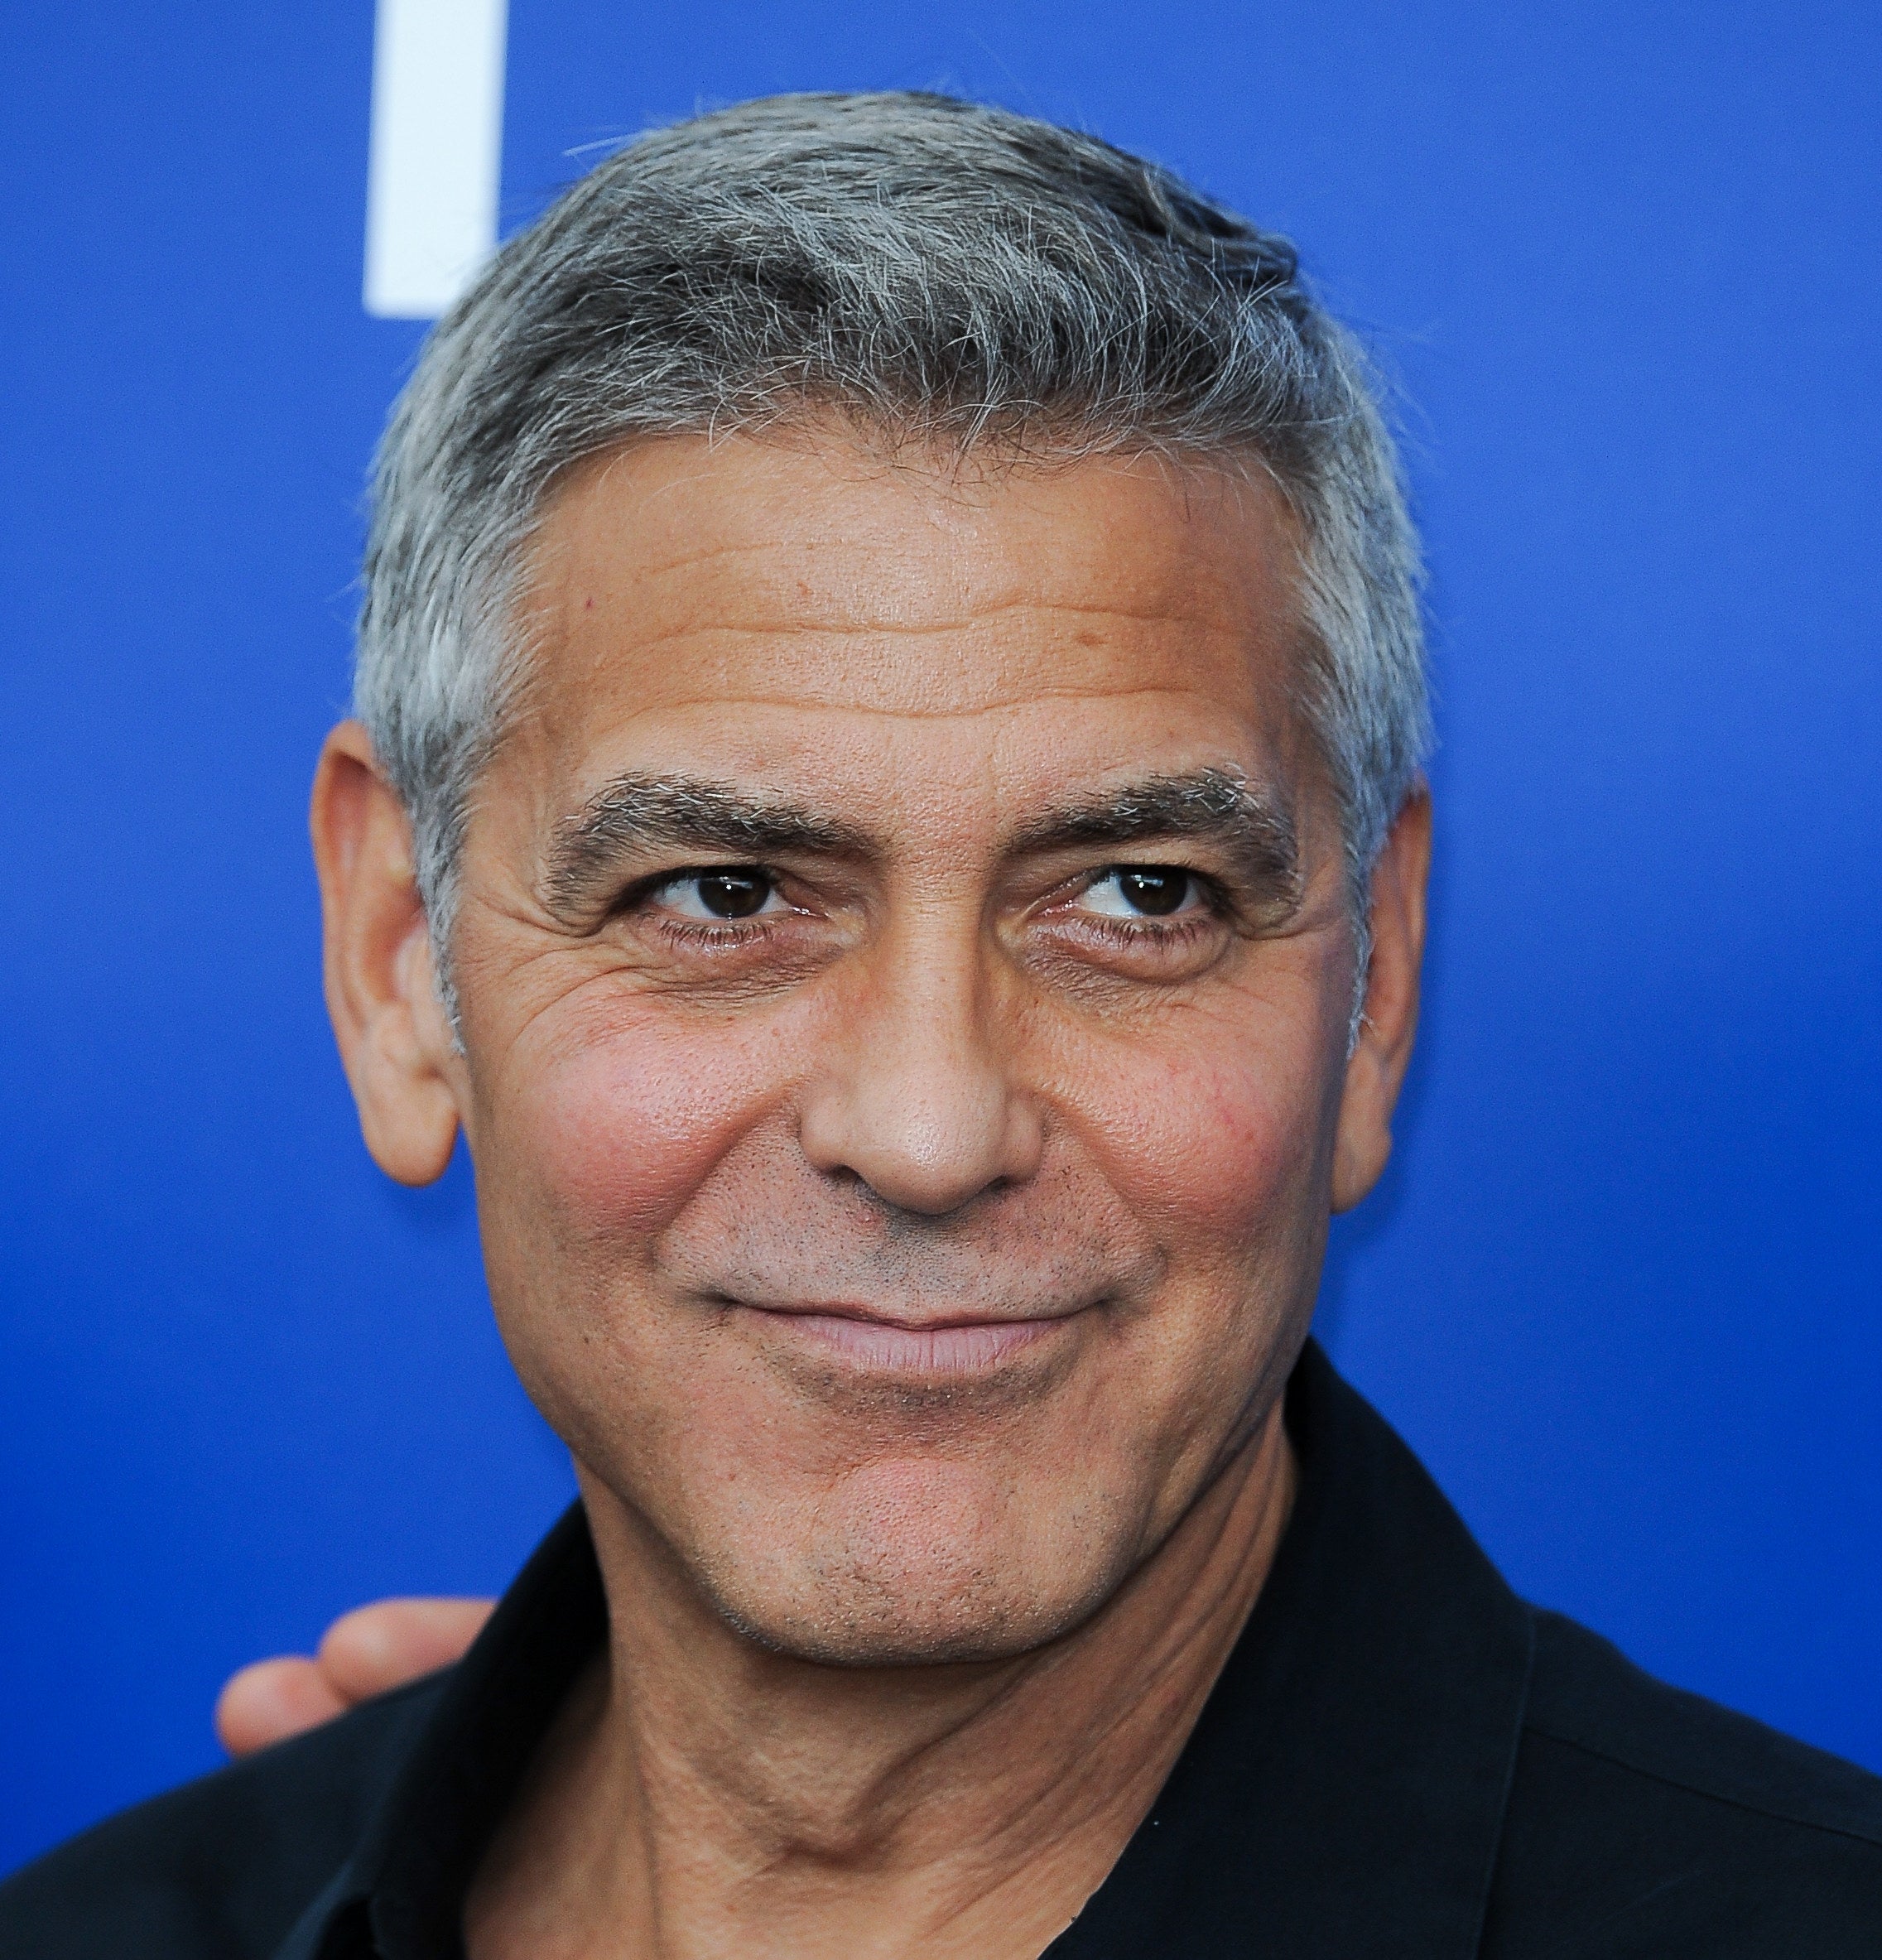 George Clooney at an event